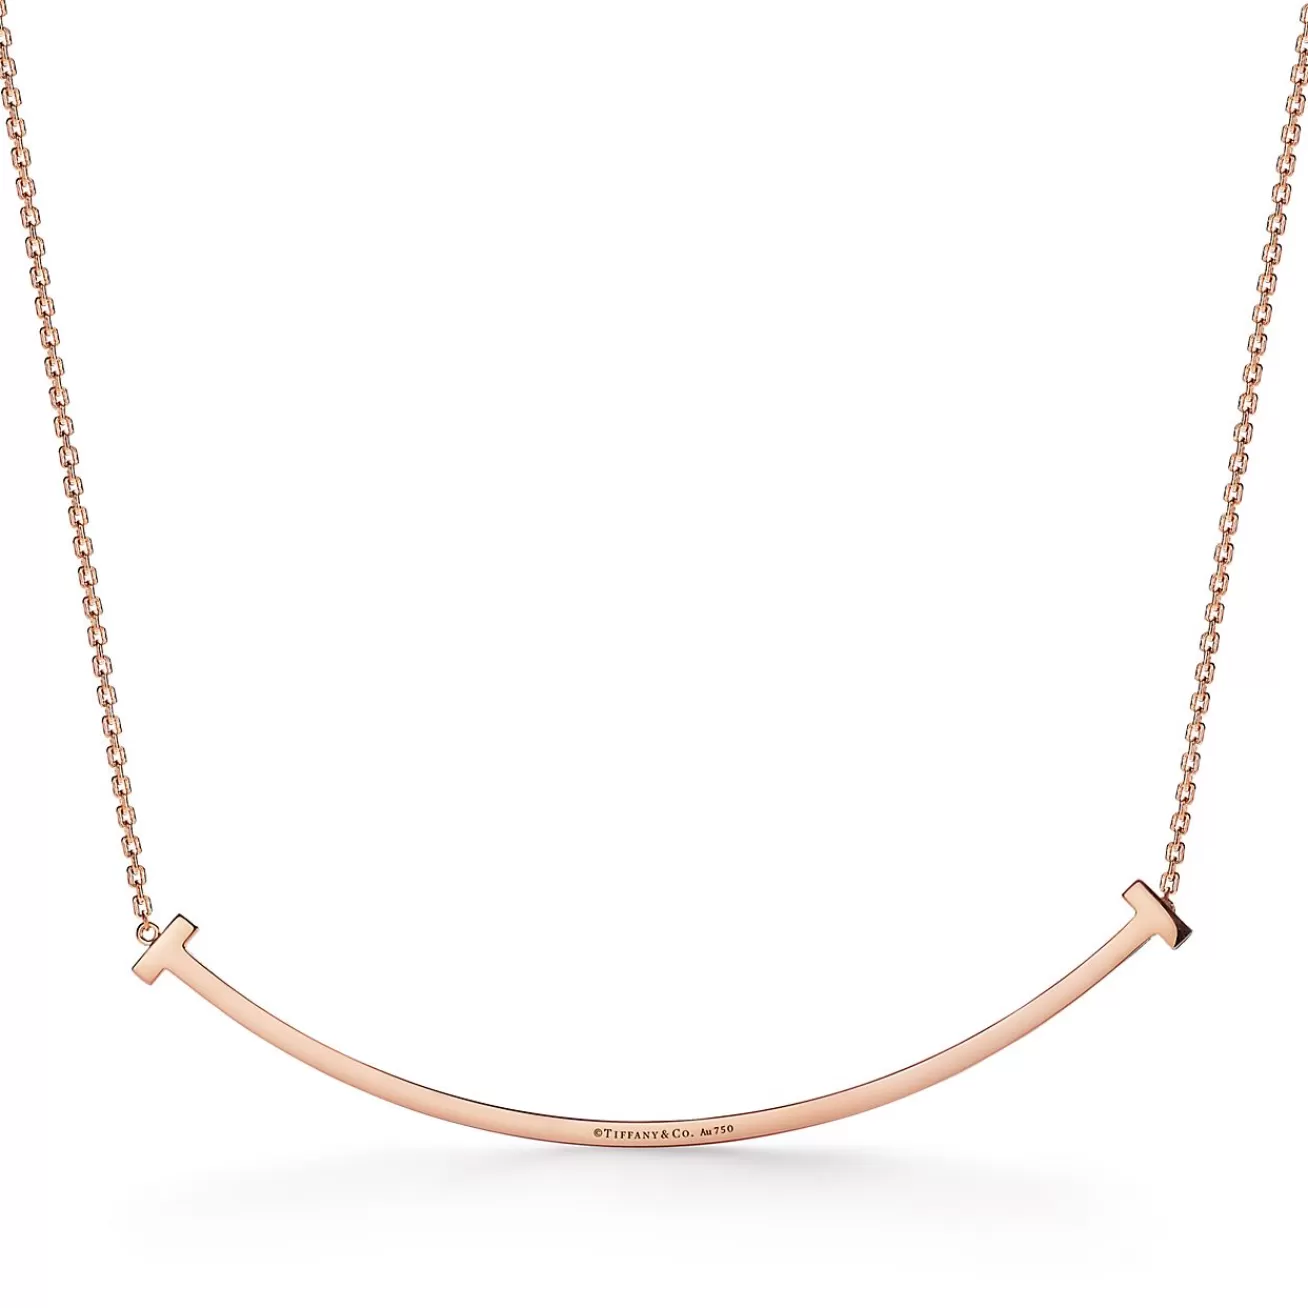 Tiffany & Co. Tiffany T extra large smile pendant in 18k rose gold with diamonds. | ^ Necklaces & Pendants | Men's Jewelry